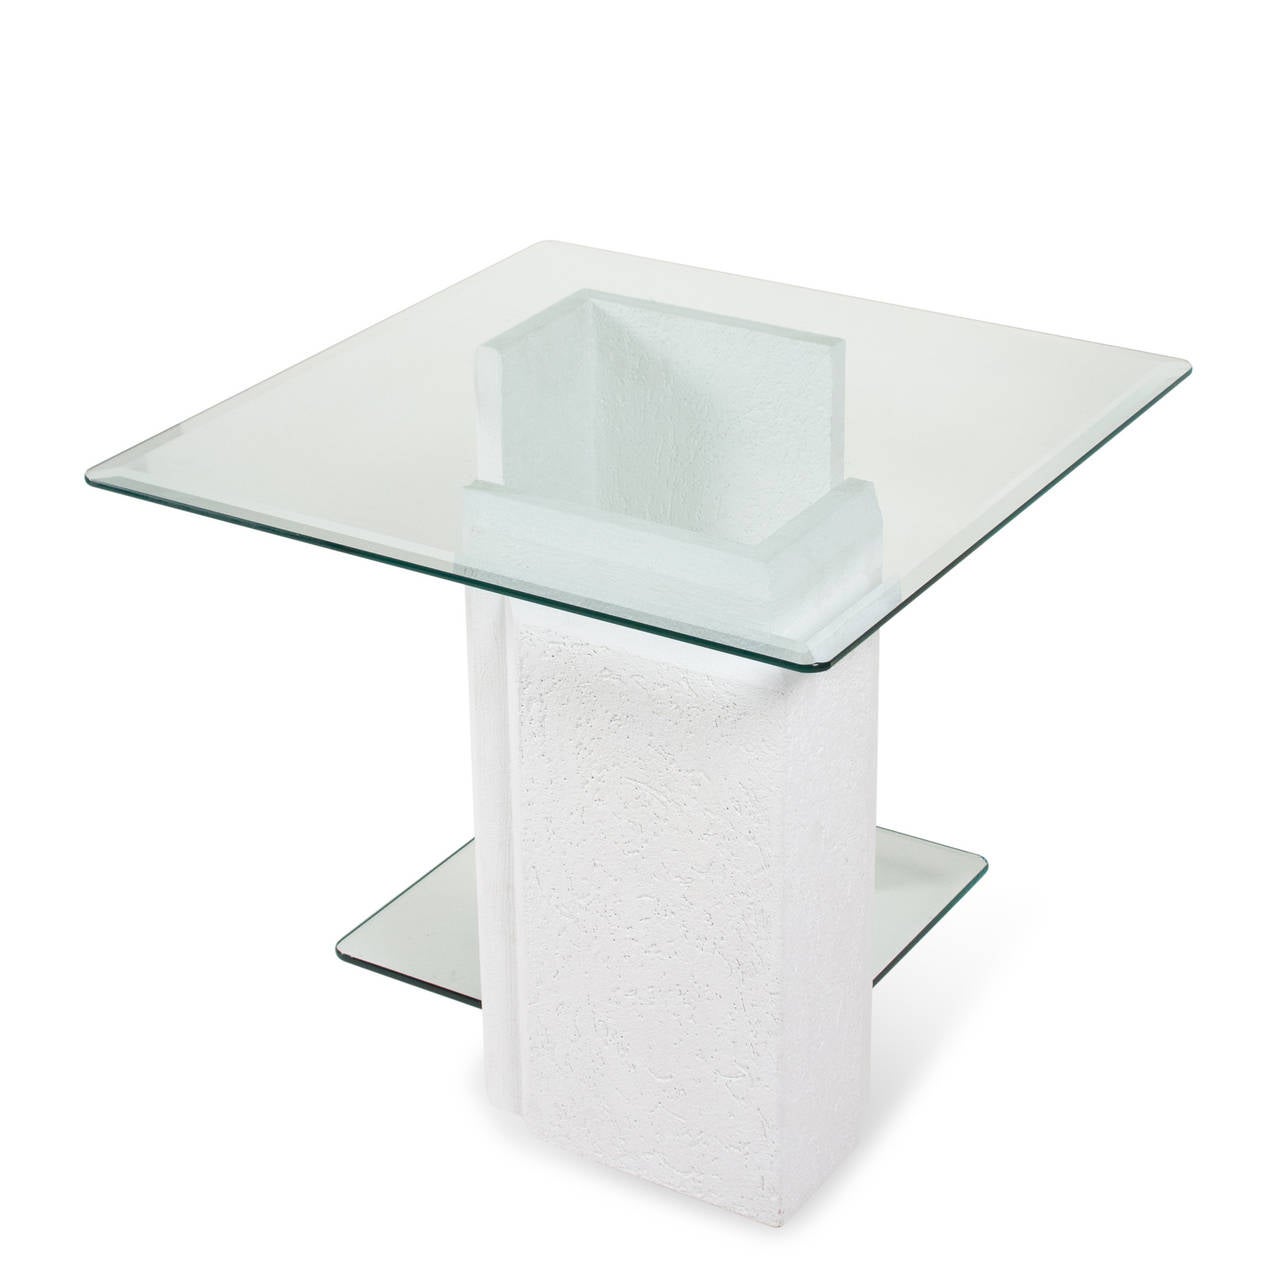 Pair of square textured white painted stone table bases, glass top with lower glass shelf. The stone elements in L-shape. American 1980s. 26 in square, height 21 3/4 in. Lower glass piece is 16 3/4 in square. (Item #2339 sats)